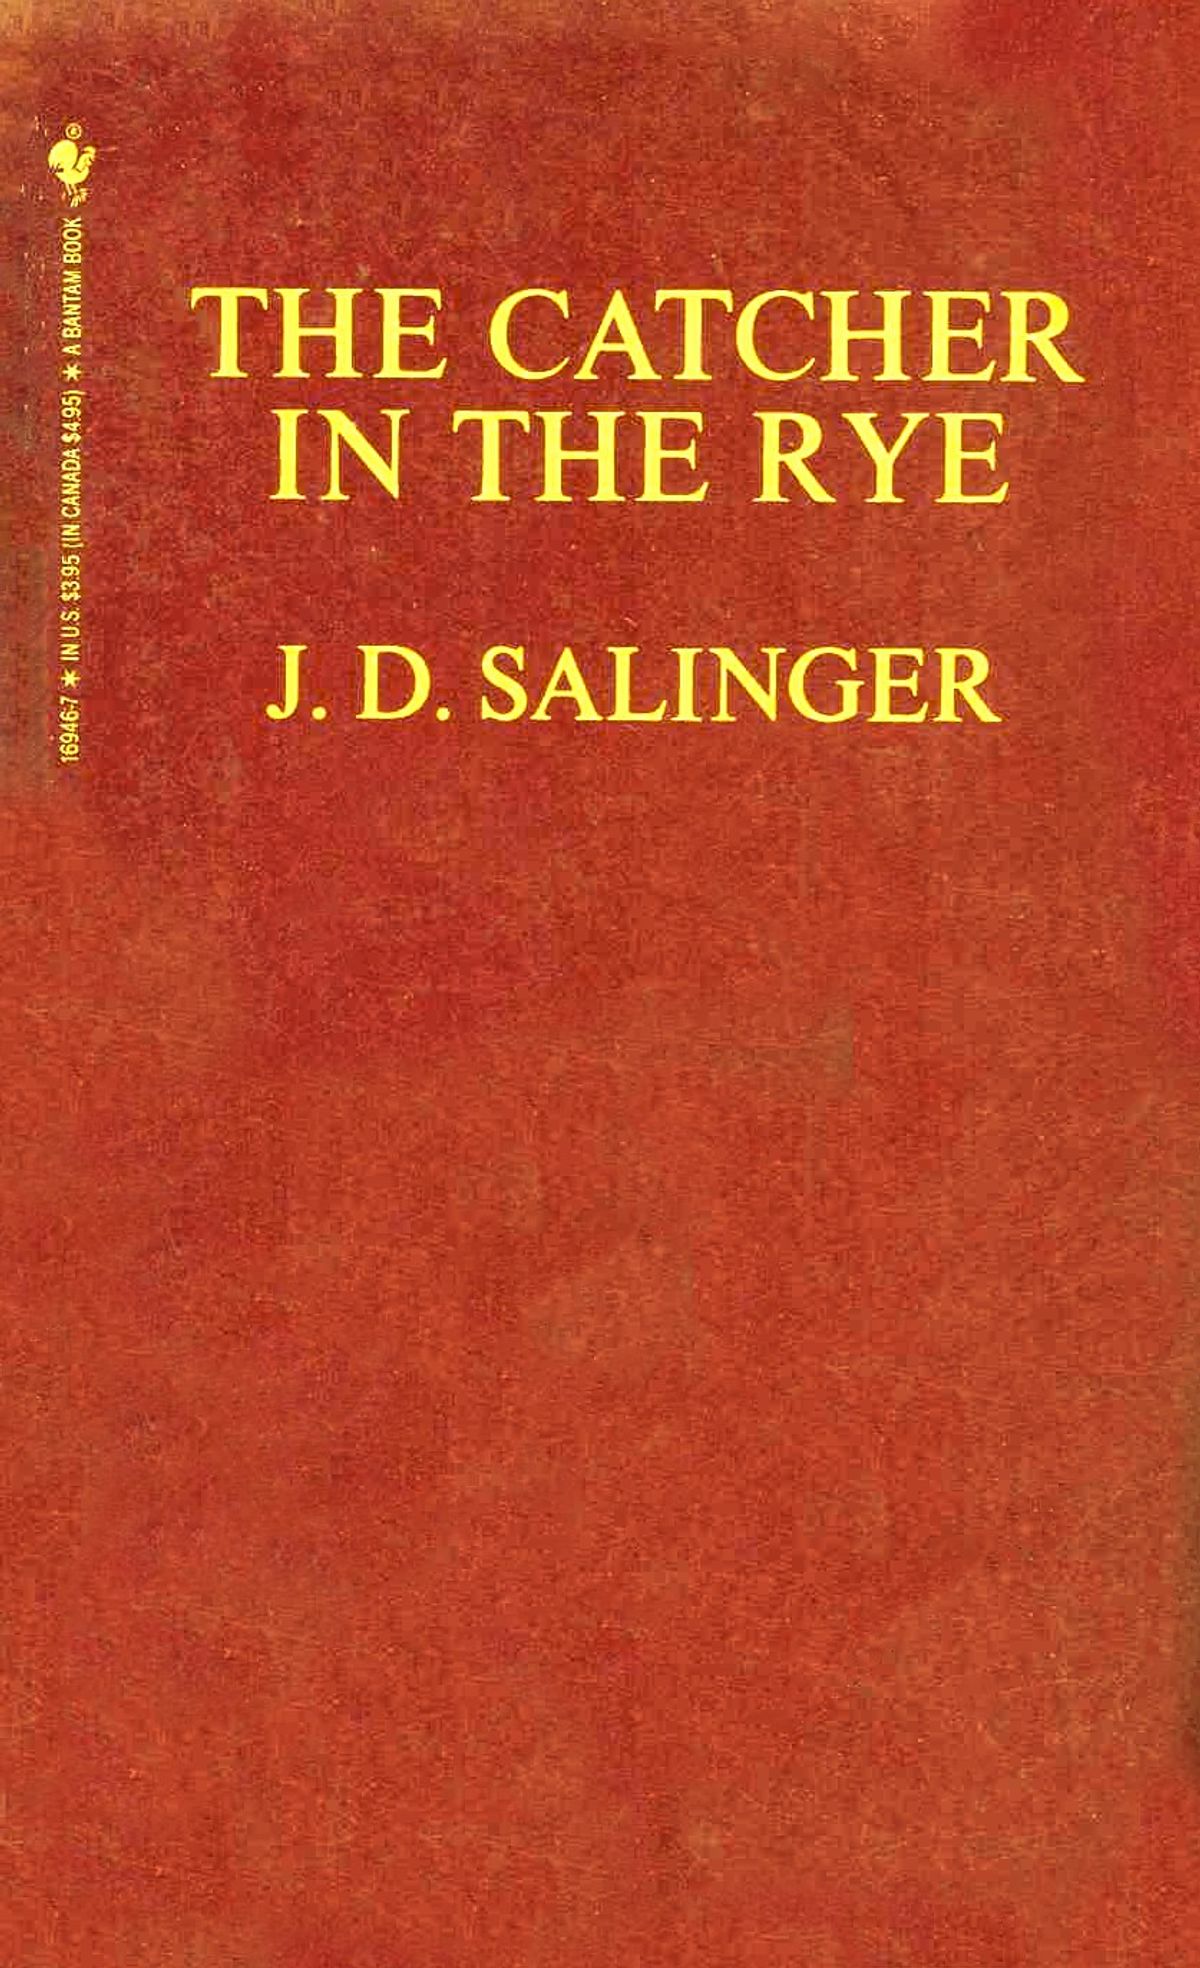 In Defense Of "The Catcher In The Rye"